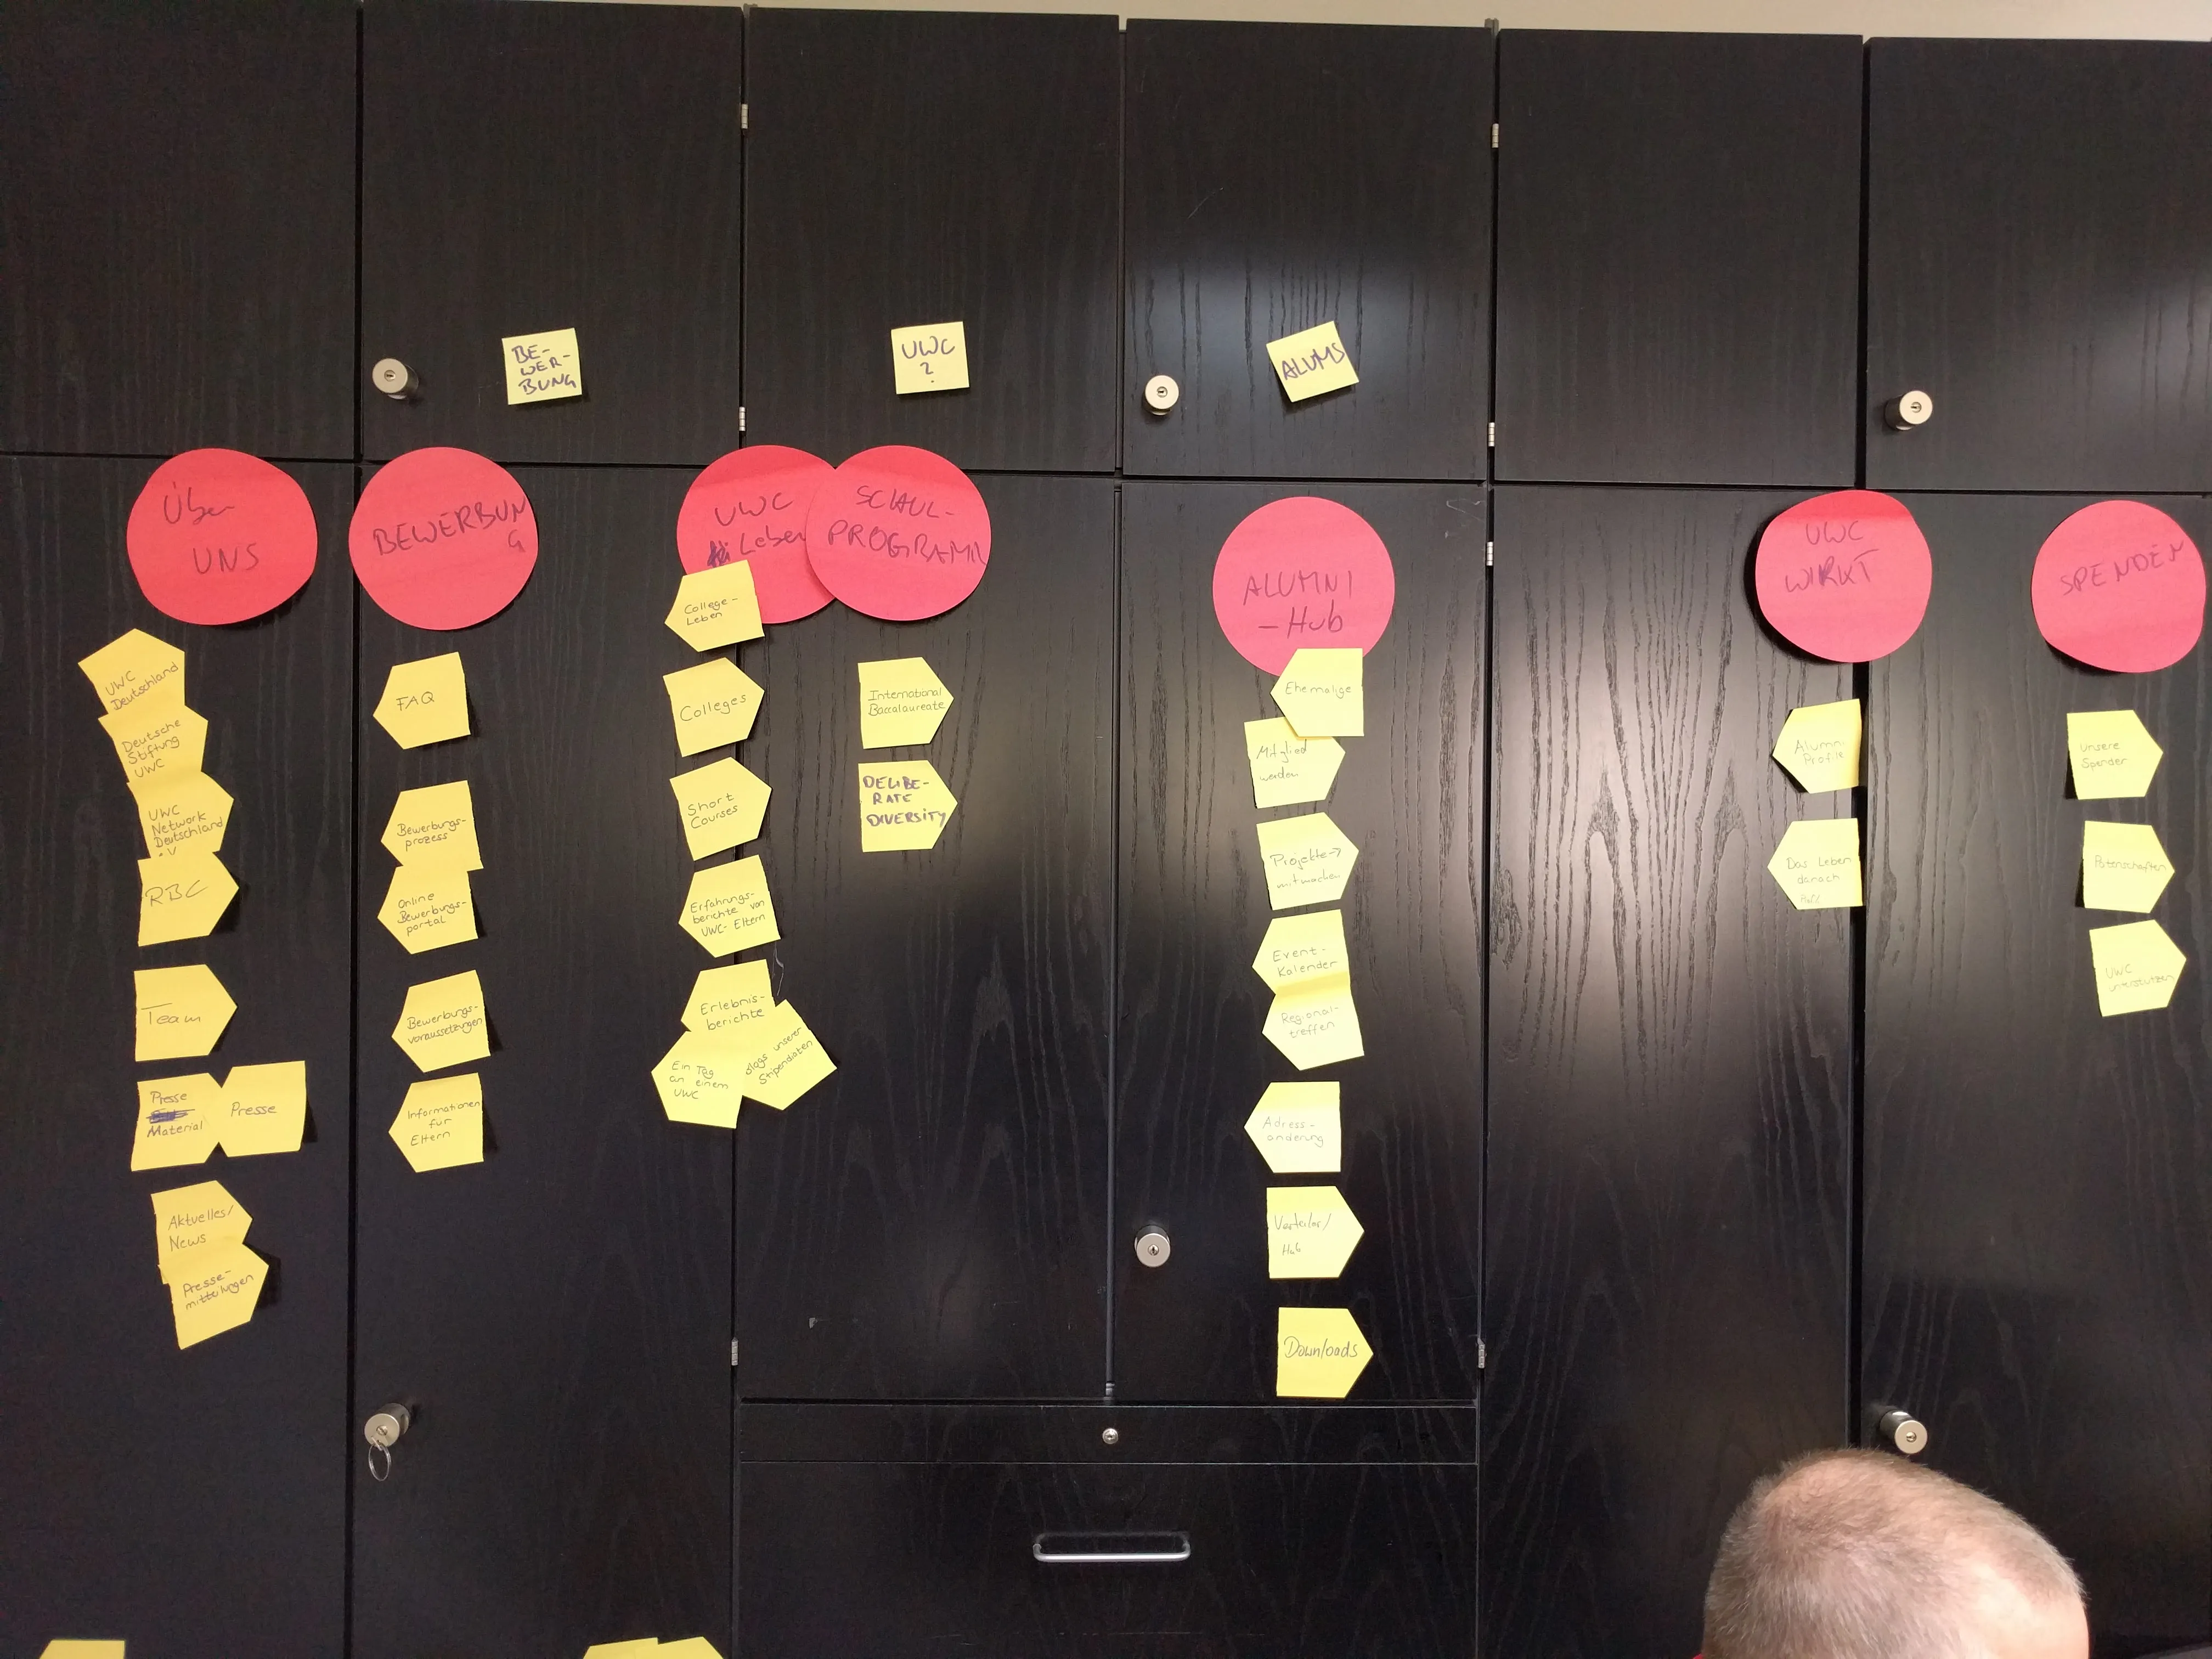 Post-it notes with page names written on them are grouped by category on a wall